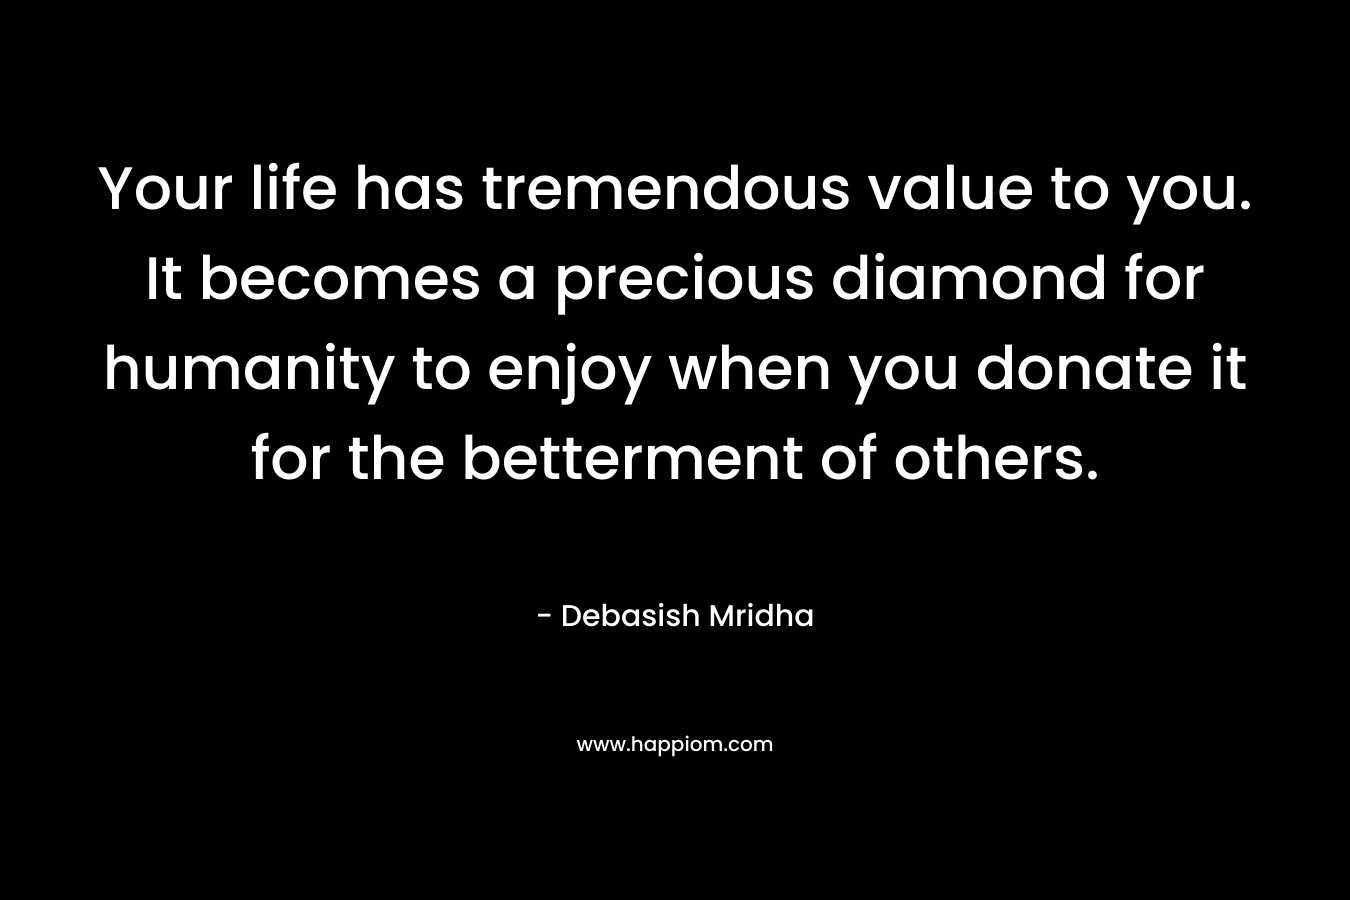 Your life has tremendous value to you. It becomes a precious diamond for humanity to enjoy when you donate it for the betterment of others. – Debasish Mridha